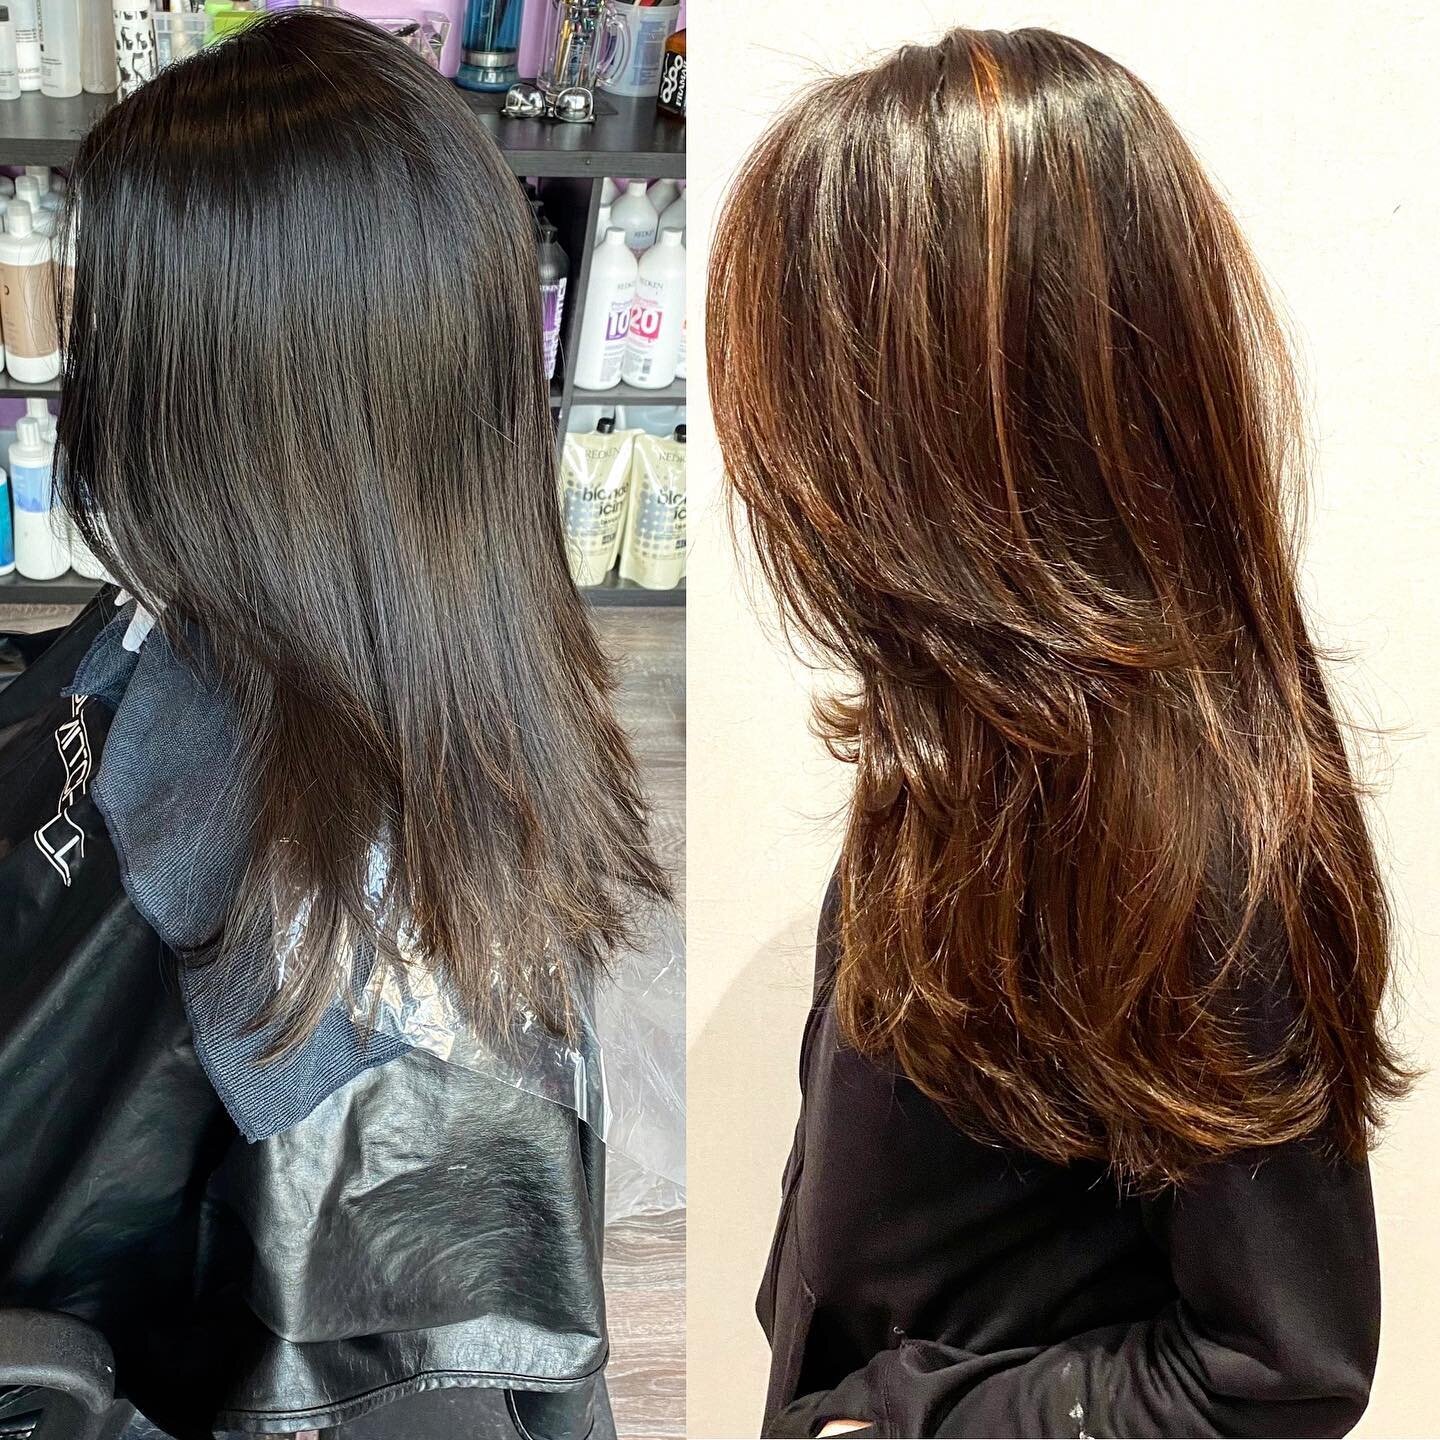 Color &amp; Cutting to make the hair look longer🤔🤔🤔😱It&rsquo;s a gift🥰😍🥰.⁣
#balayagehair #hair #americansalon #hairgoals #brownhair #balayagehighlights #blondespecialist #hairstylist #blondehair #haircut #balayage #balayageombre #beforeandafte